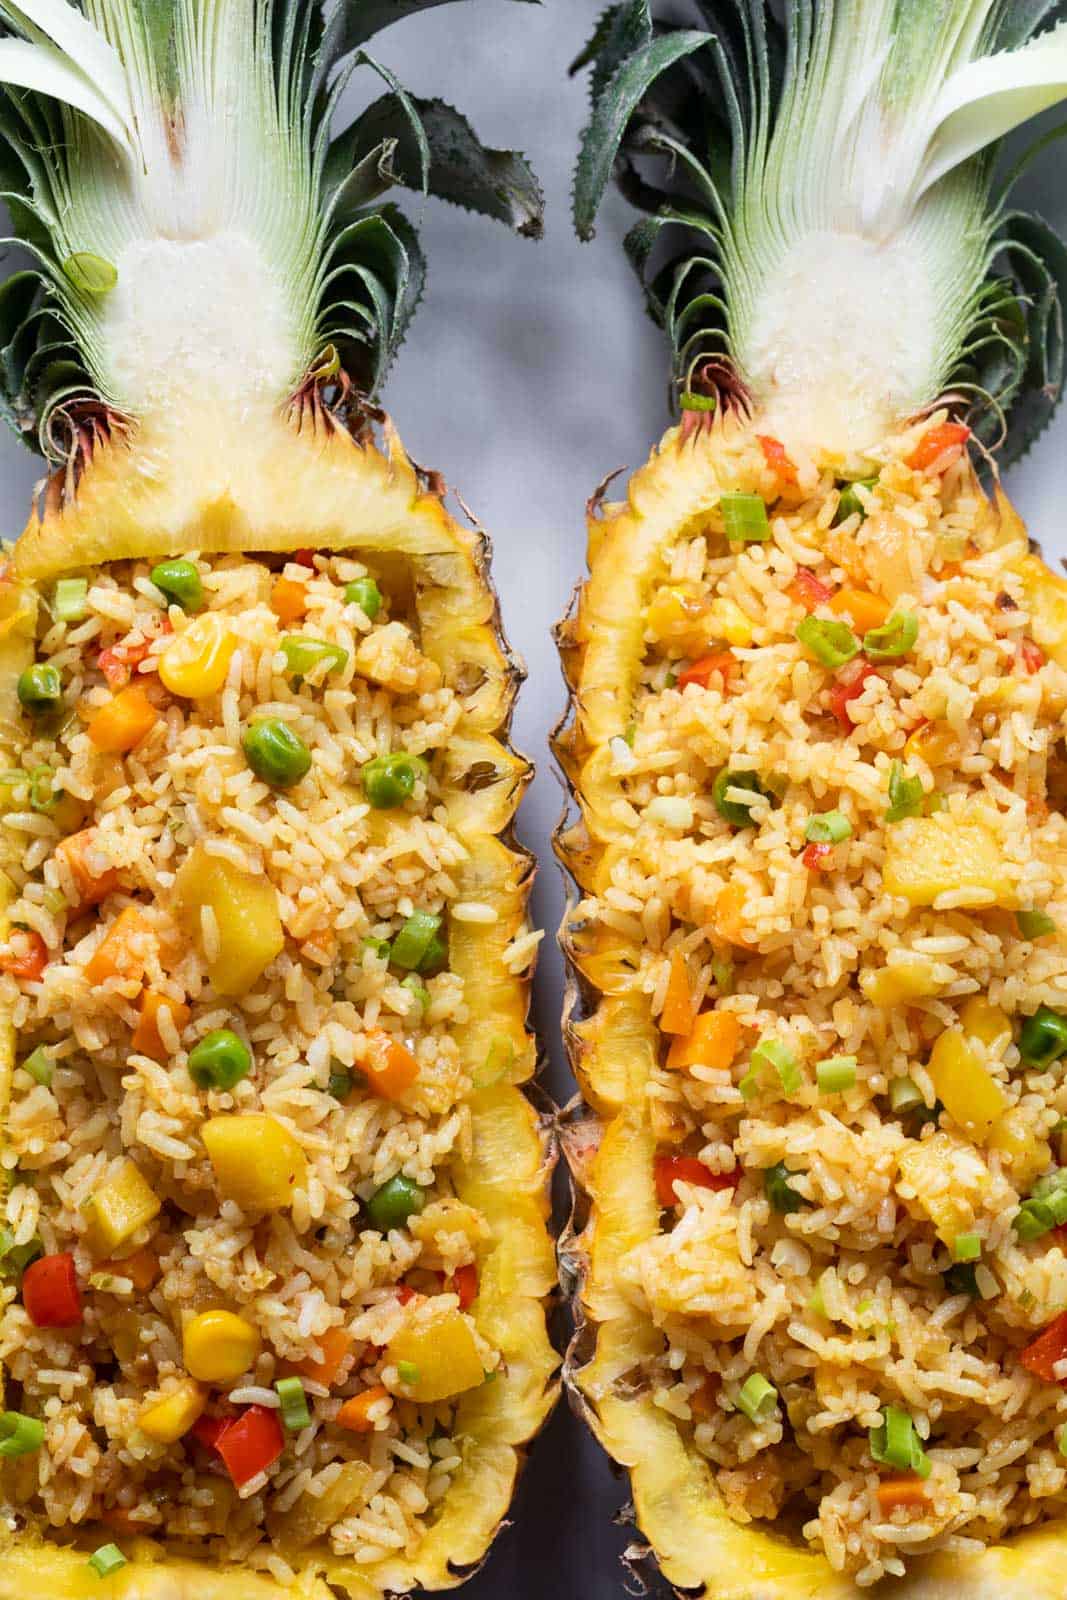 Thai Pineapple fried rice served in pineapple boats